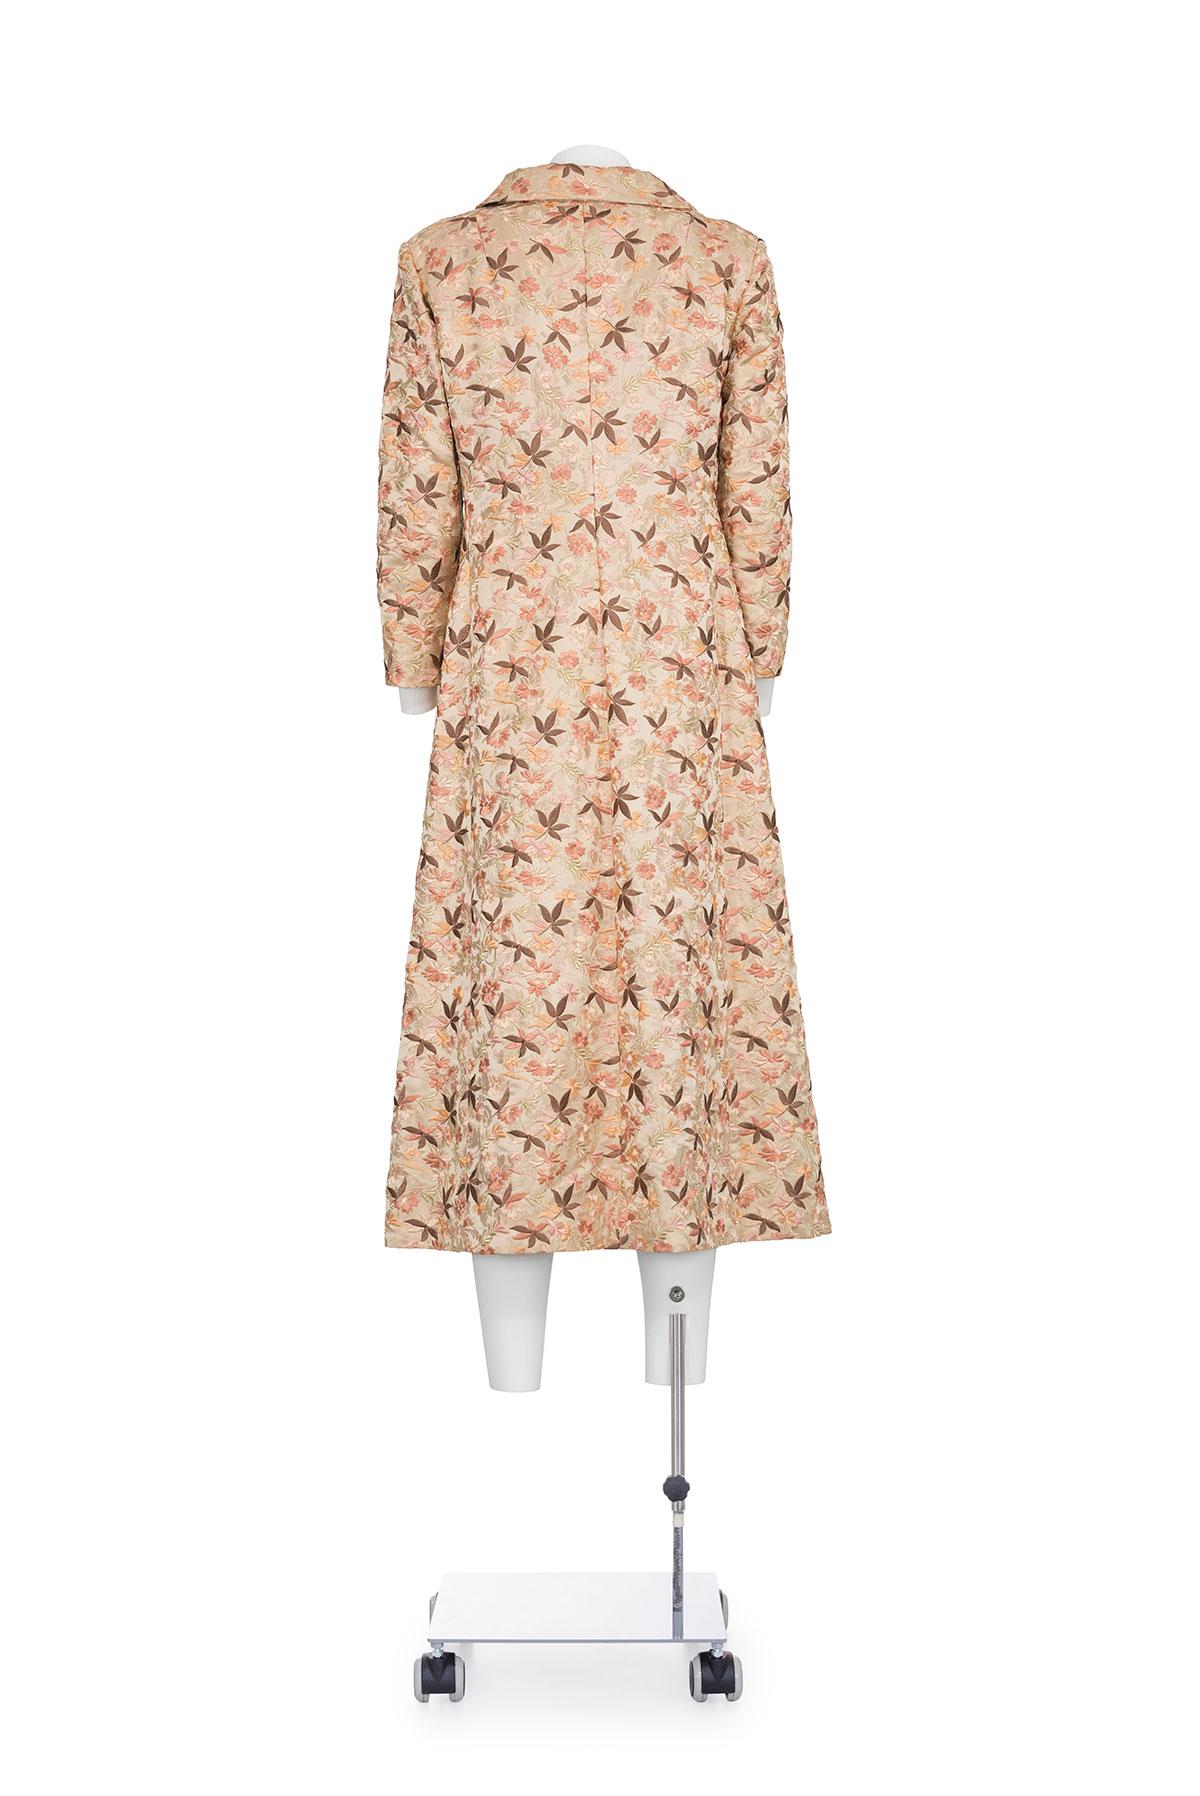 DOLCE & GABBANA SS 97 Rare Floral Embroidered Lightweight Coat In Excellent Condition For Sale In Milano, MILANO